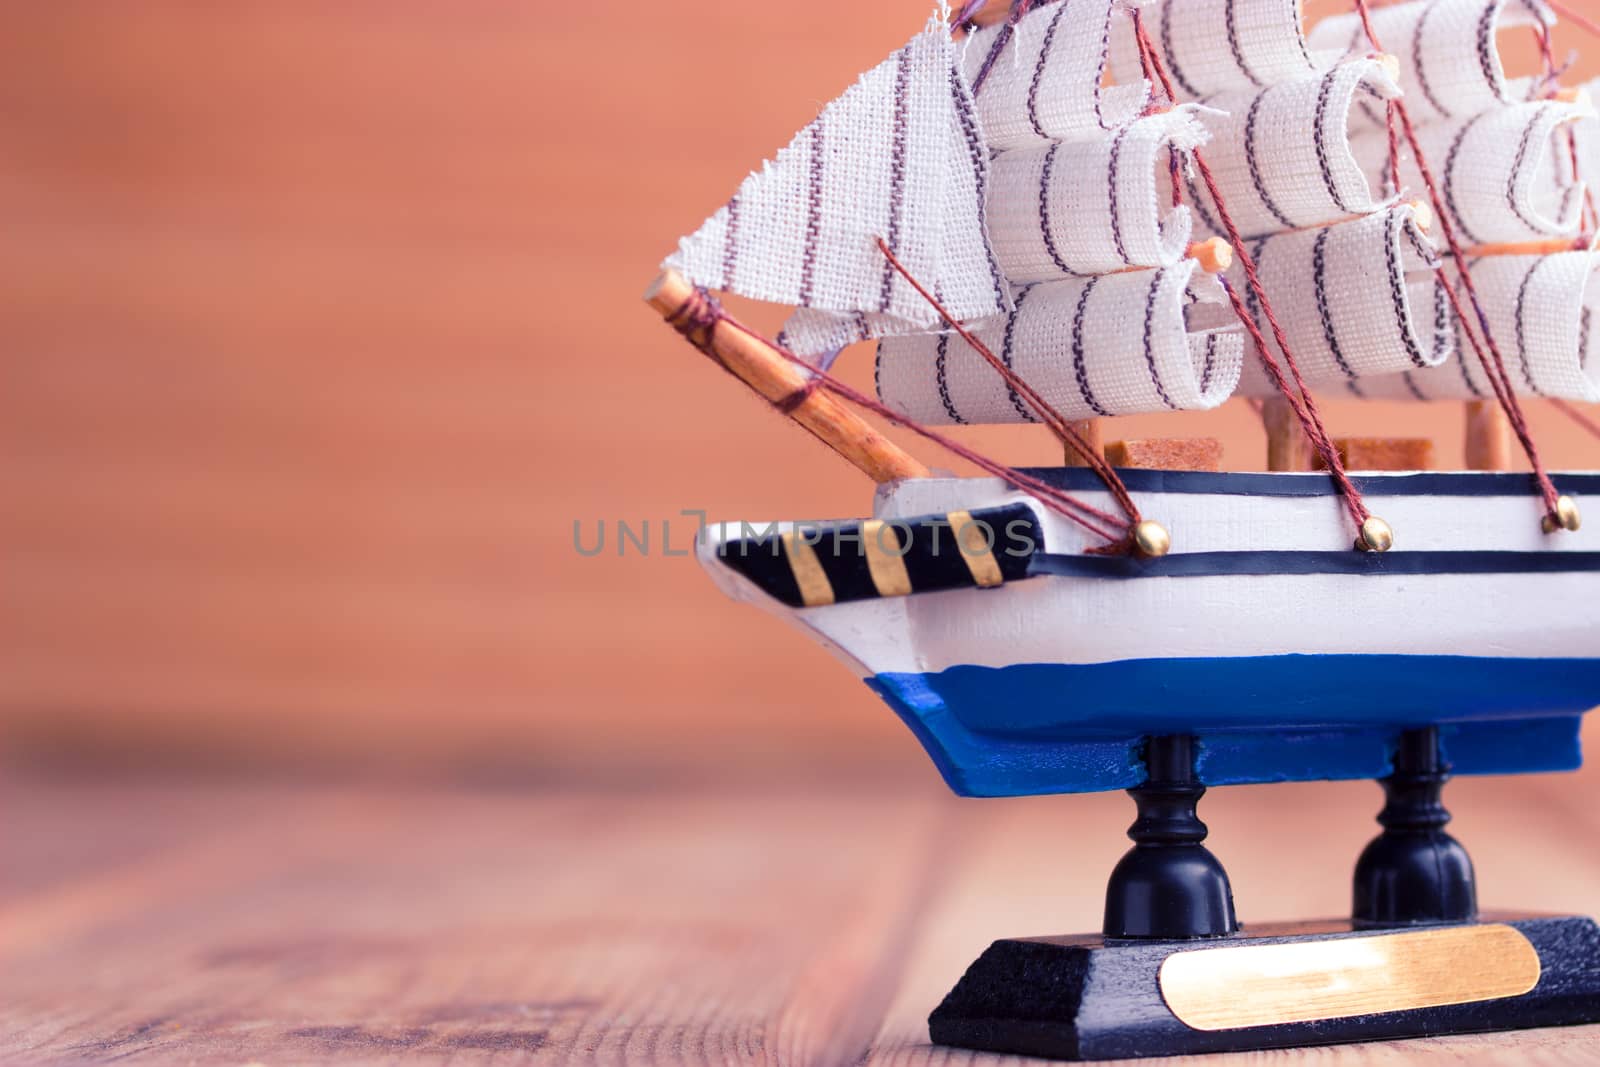 Toy sailboat on a wooden background with copy space